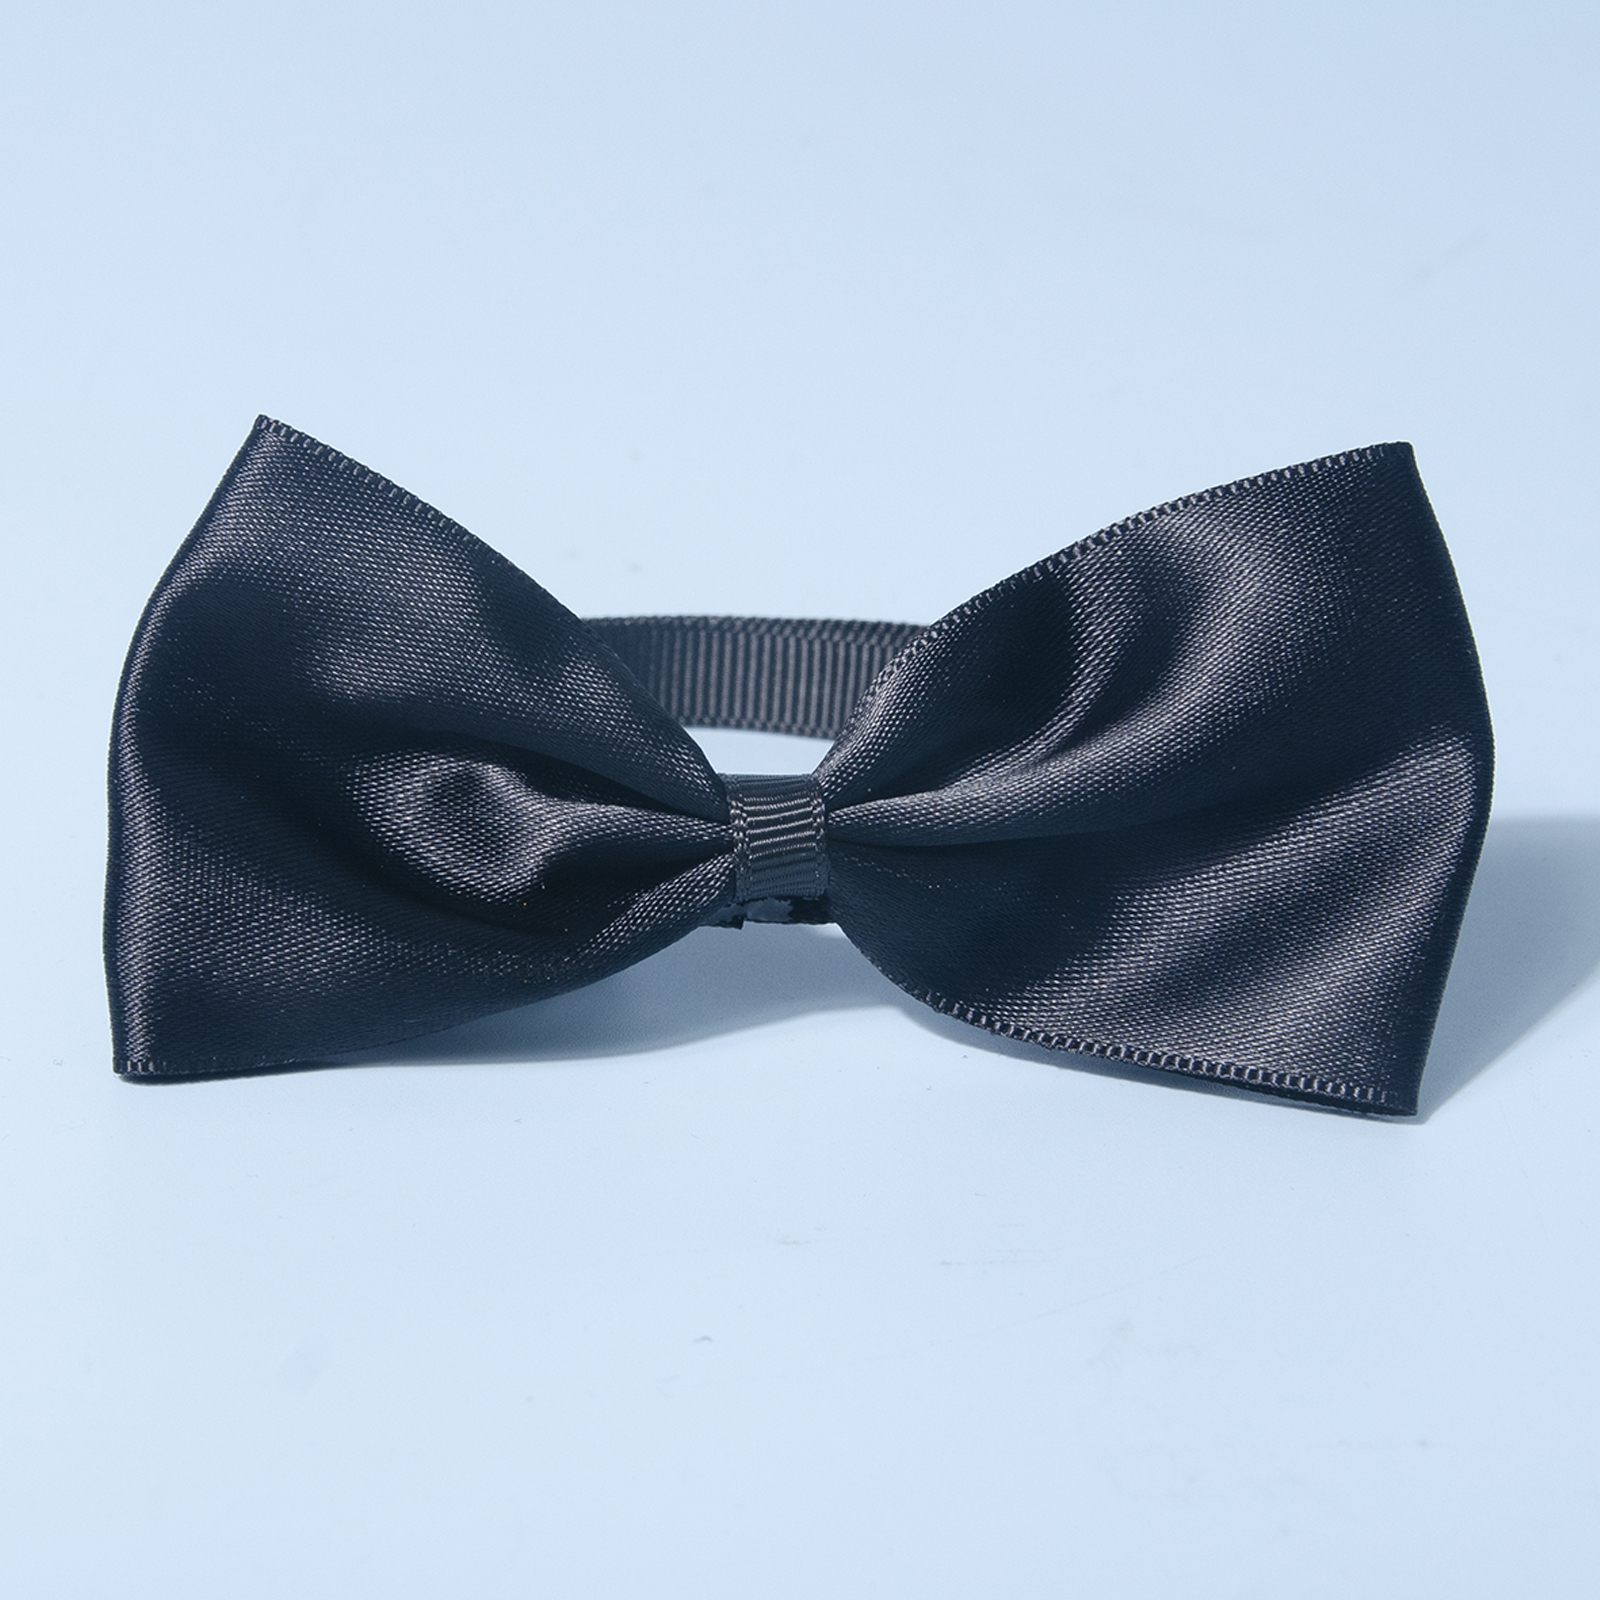 Buy 1pc Black Pet Bow Tie at Our Store